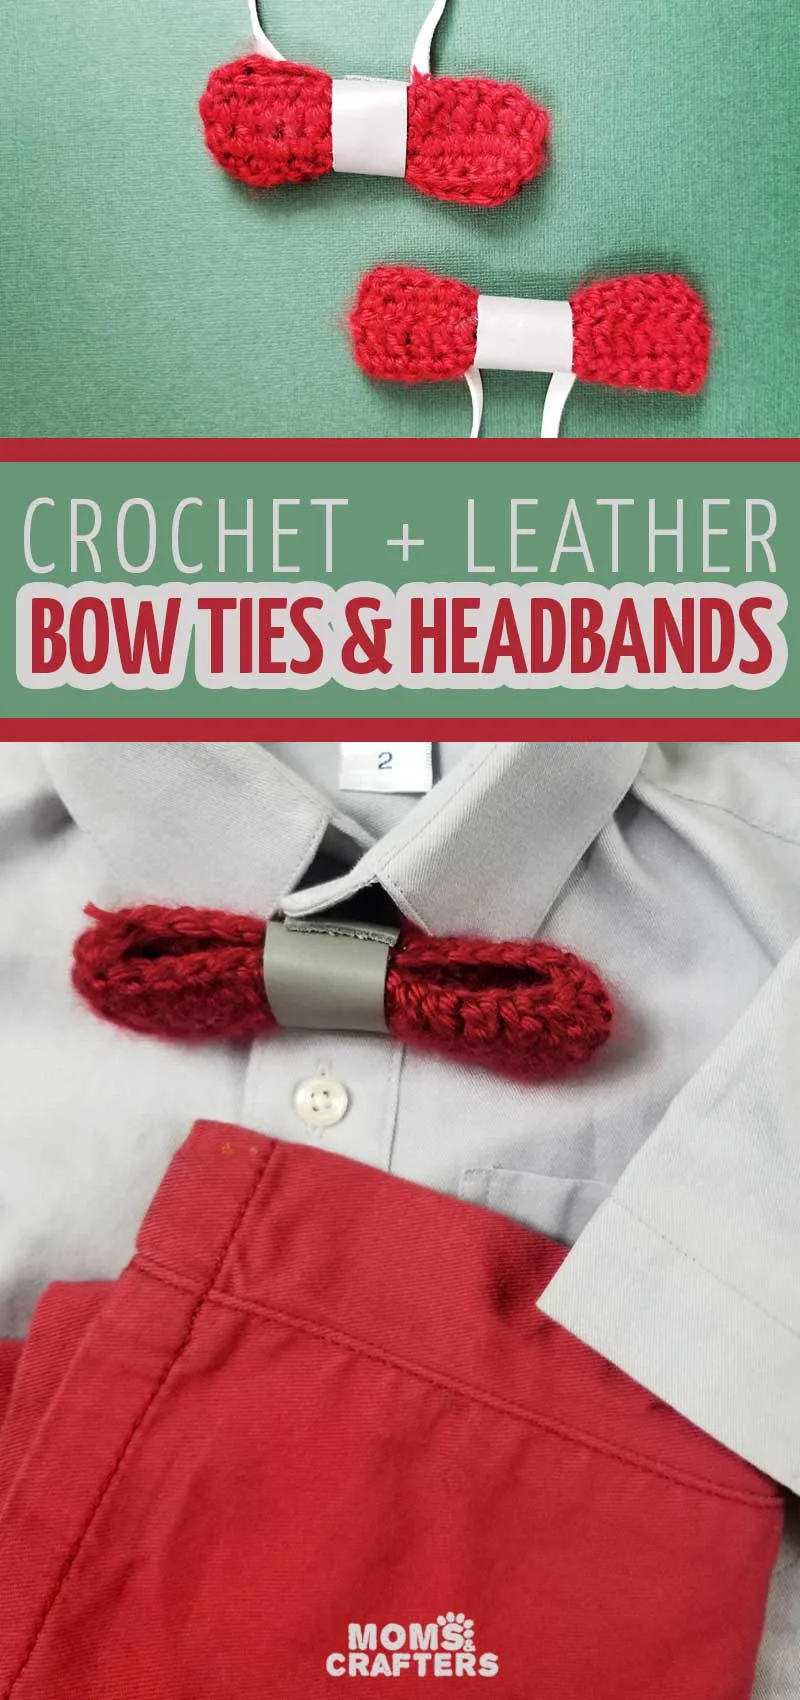 Click to learn how to crochet a bow and make the coolest leather accent bow ties and headbands - perfect holiday accessories for boys and girls!